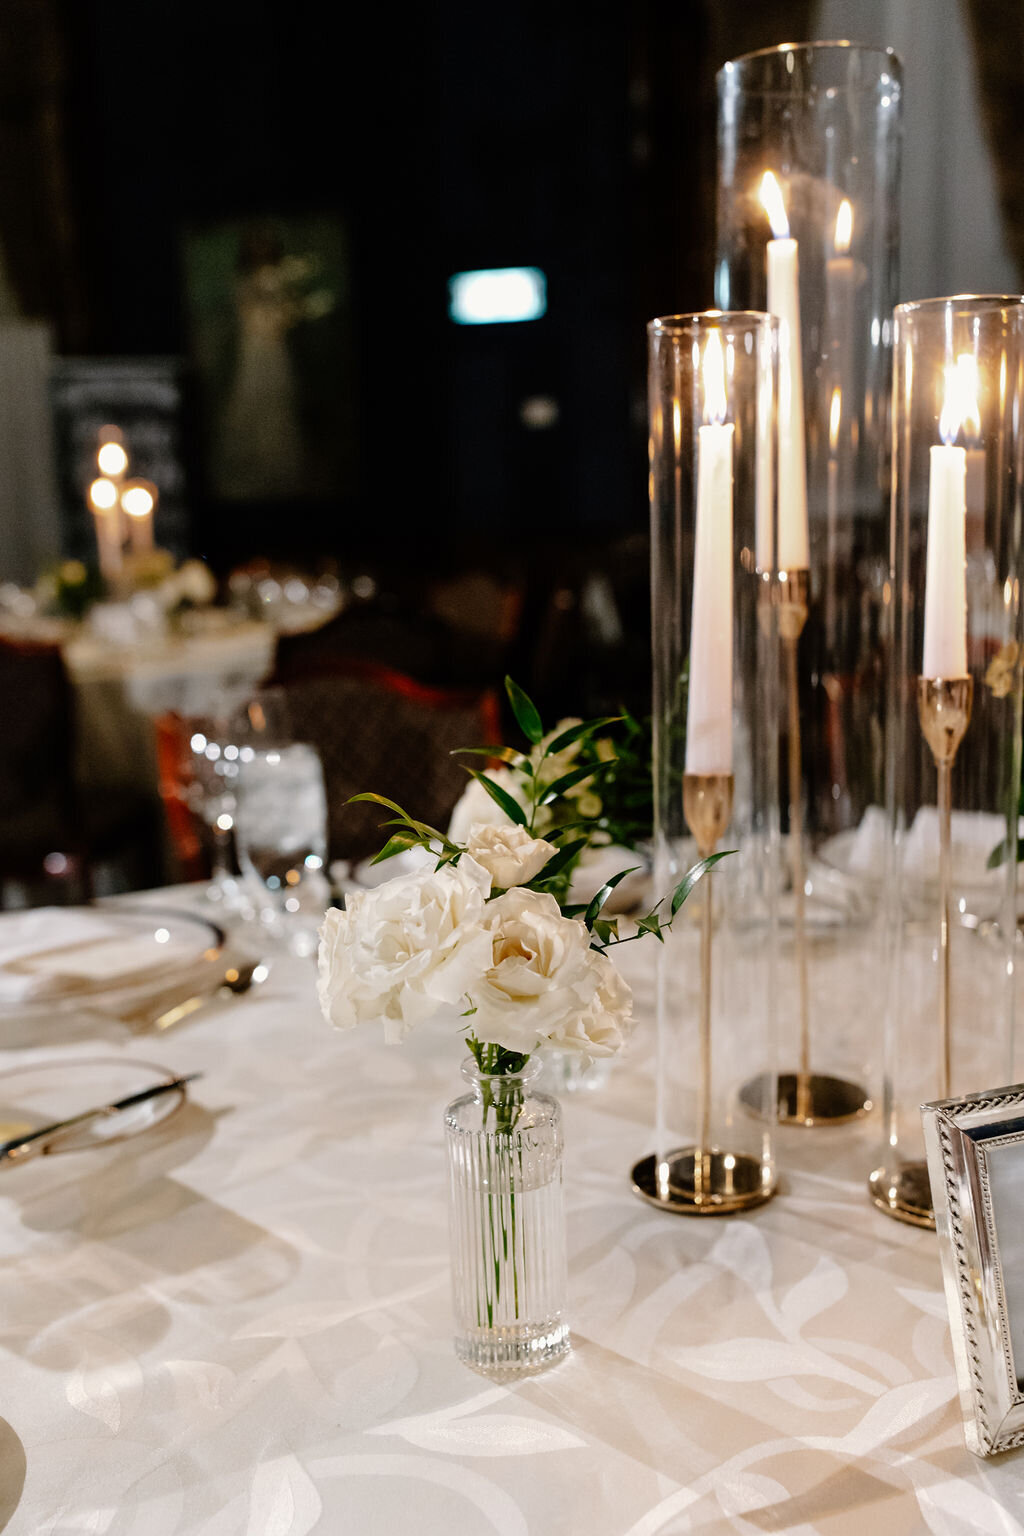 Glass and gold candlesticks accompany a vase of elegant white roses for a class wedding centerpiece look.